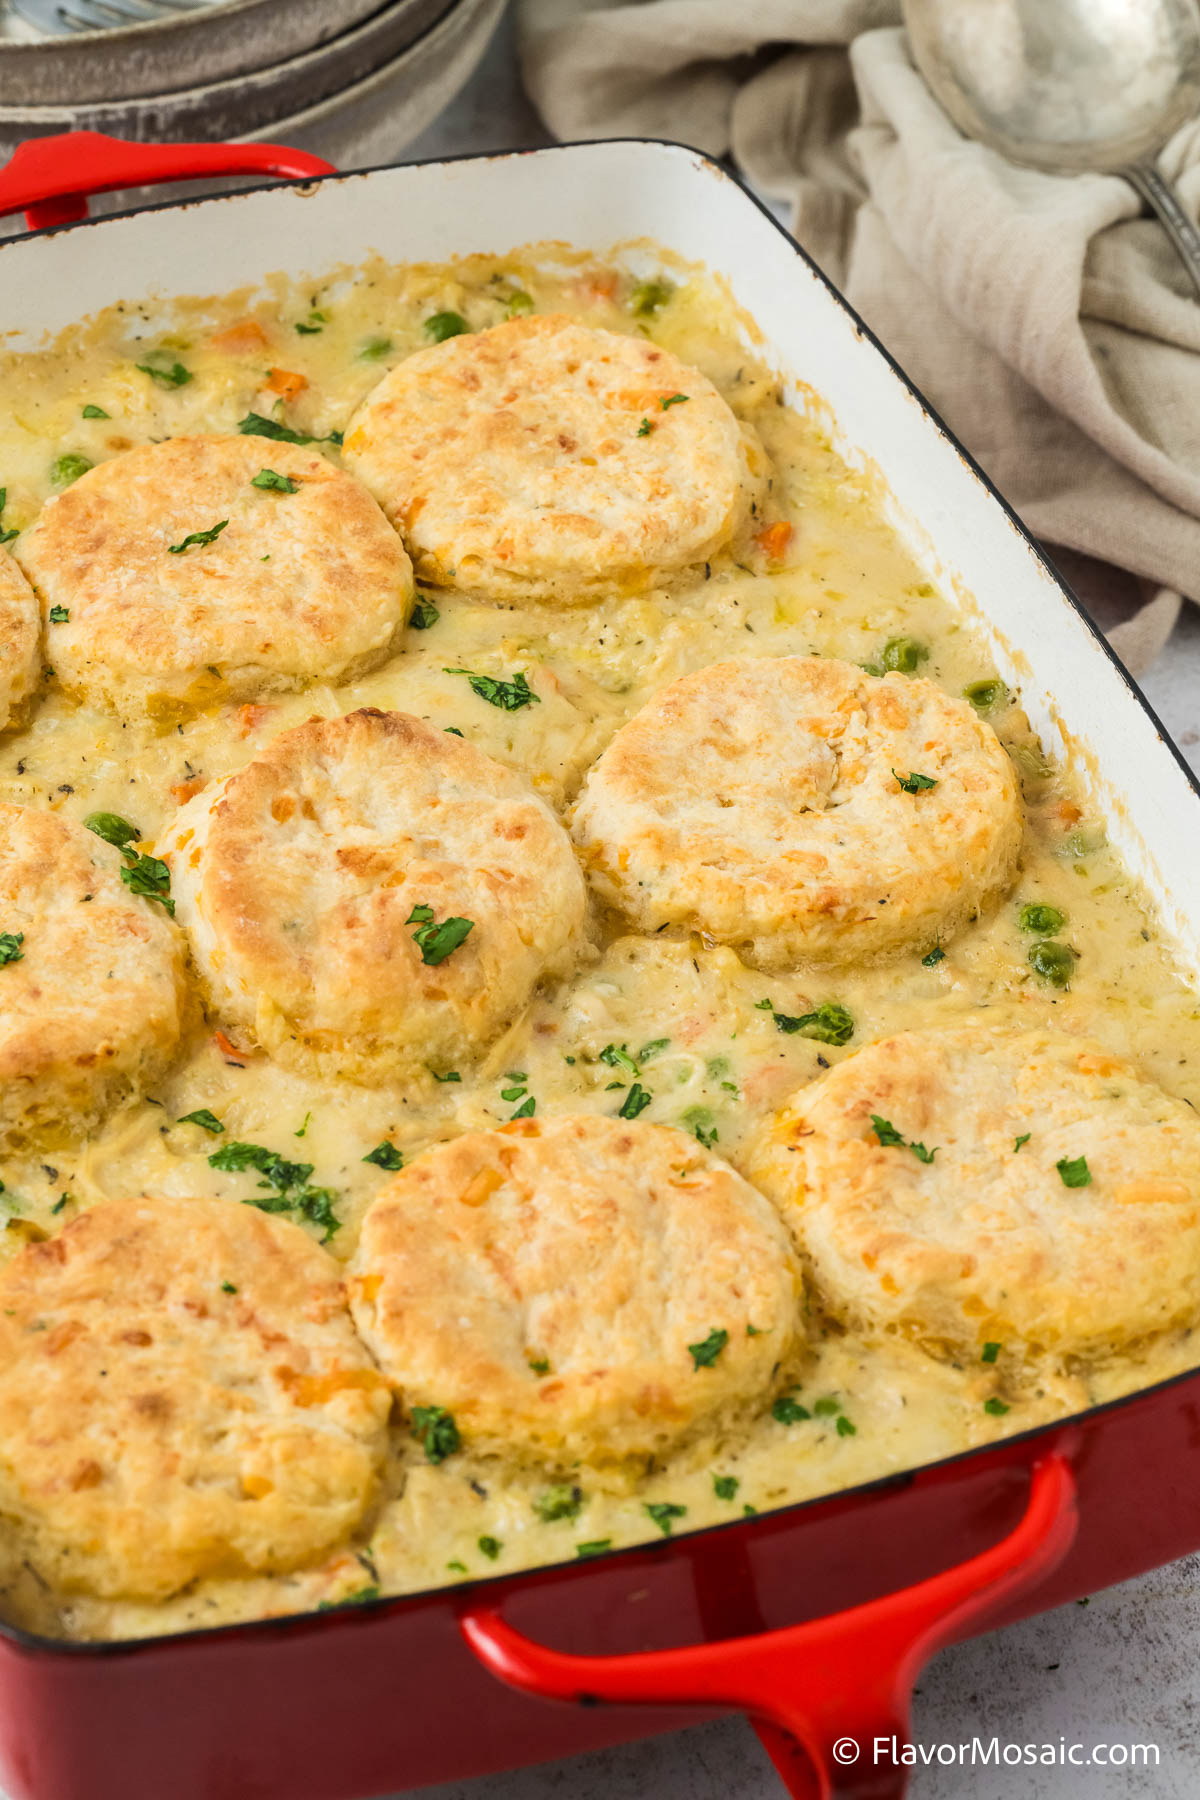 Partial view of the top of a whole creamed chicken and biscuit casserole.